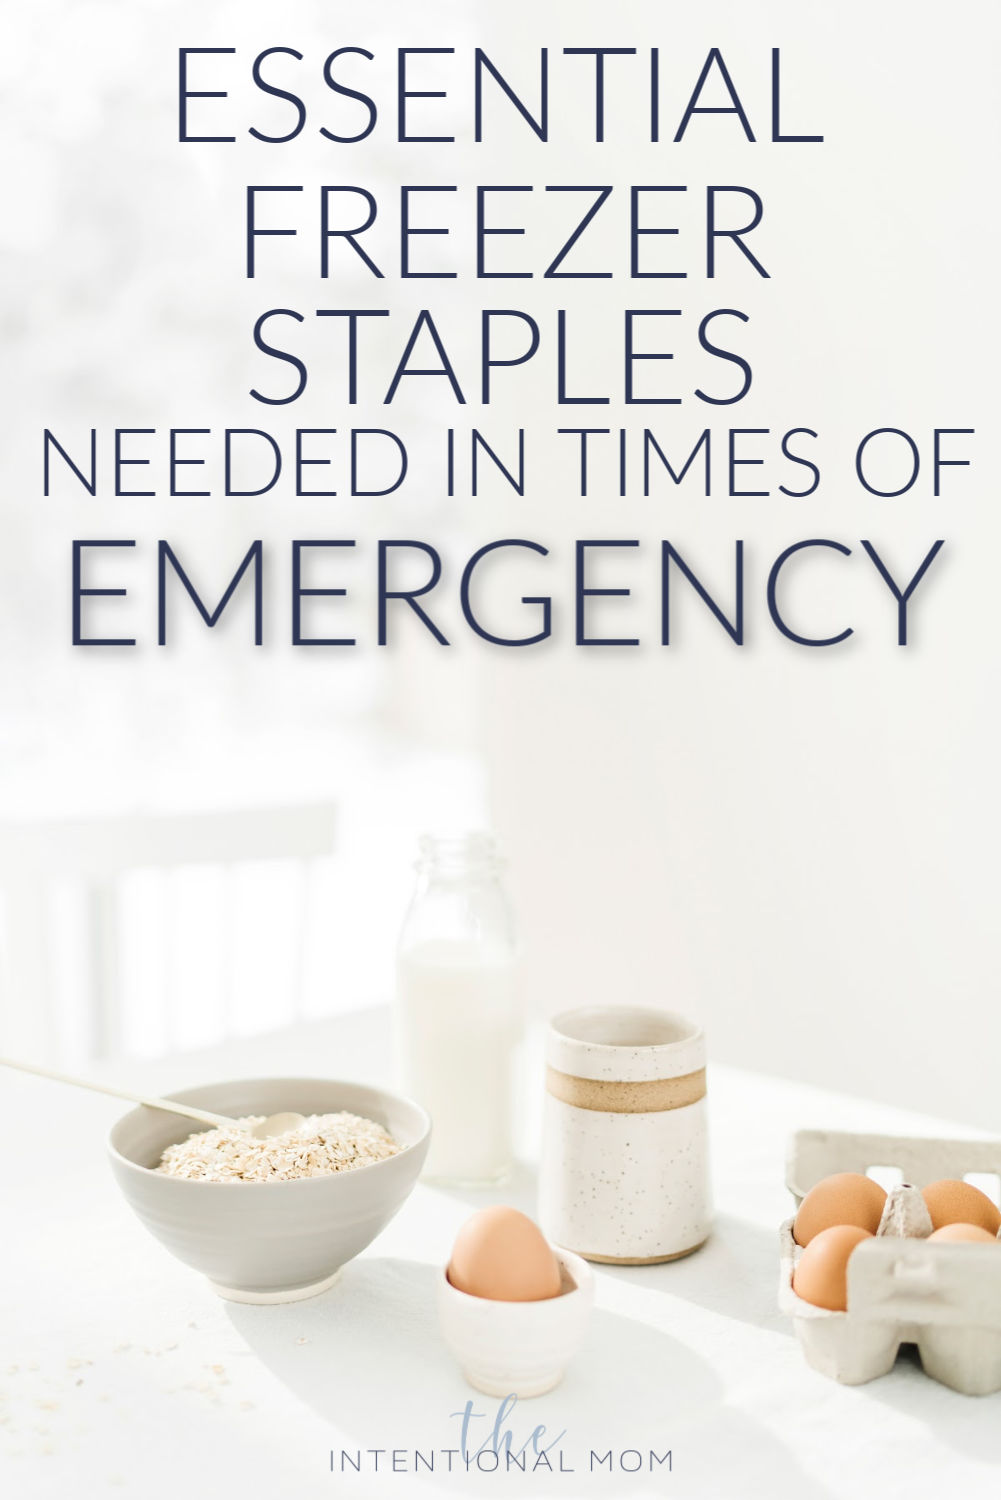 Freezer Staples Needed In Times of Emergency [or Crisis]